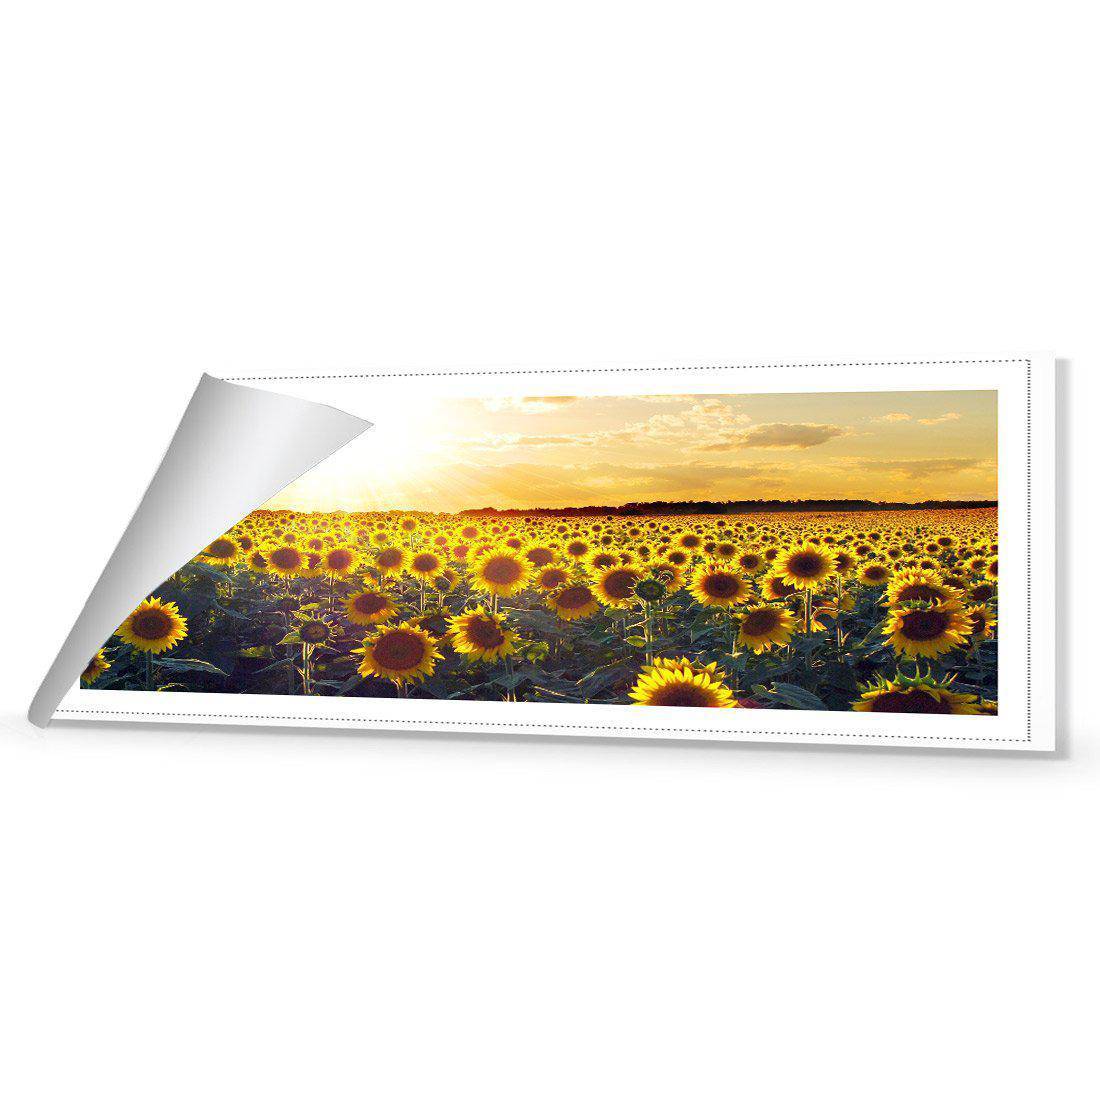 Sunflowers At Sunset Canvas Art-Canvas-Wall Art Designs-60x20cm-Rolled Canvas-Wall Art Designs